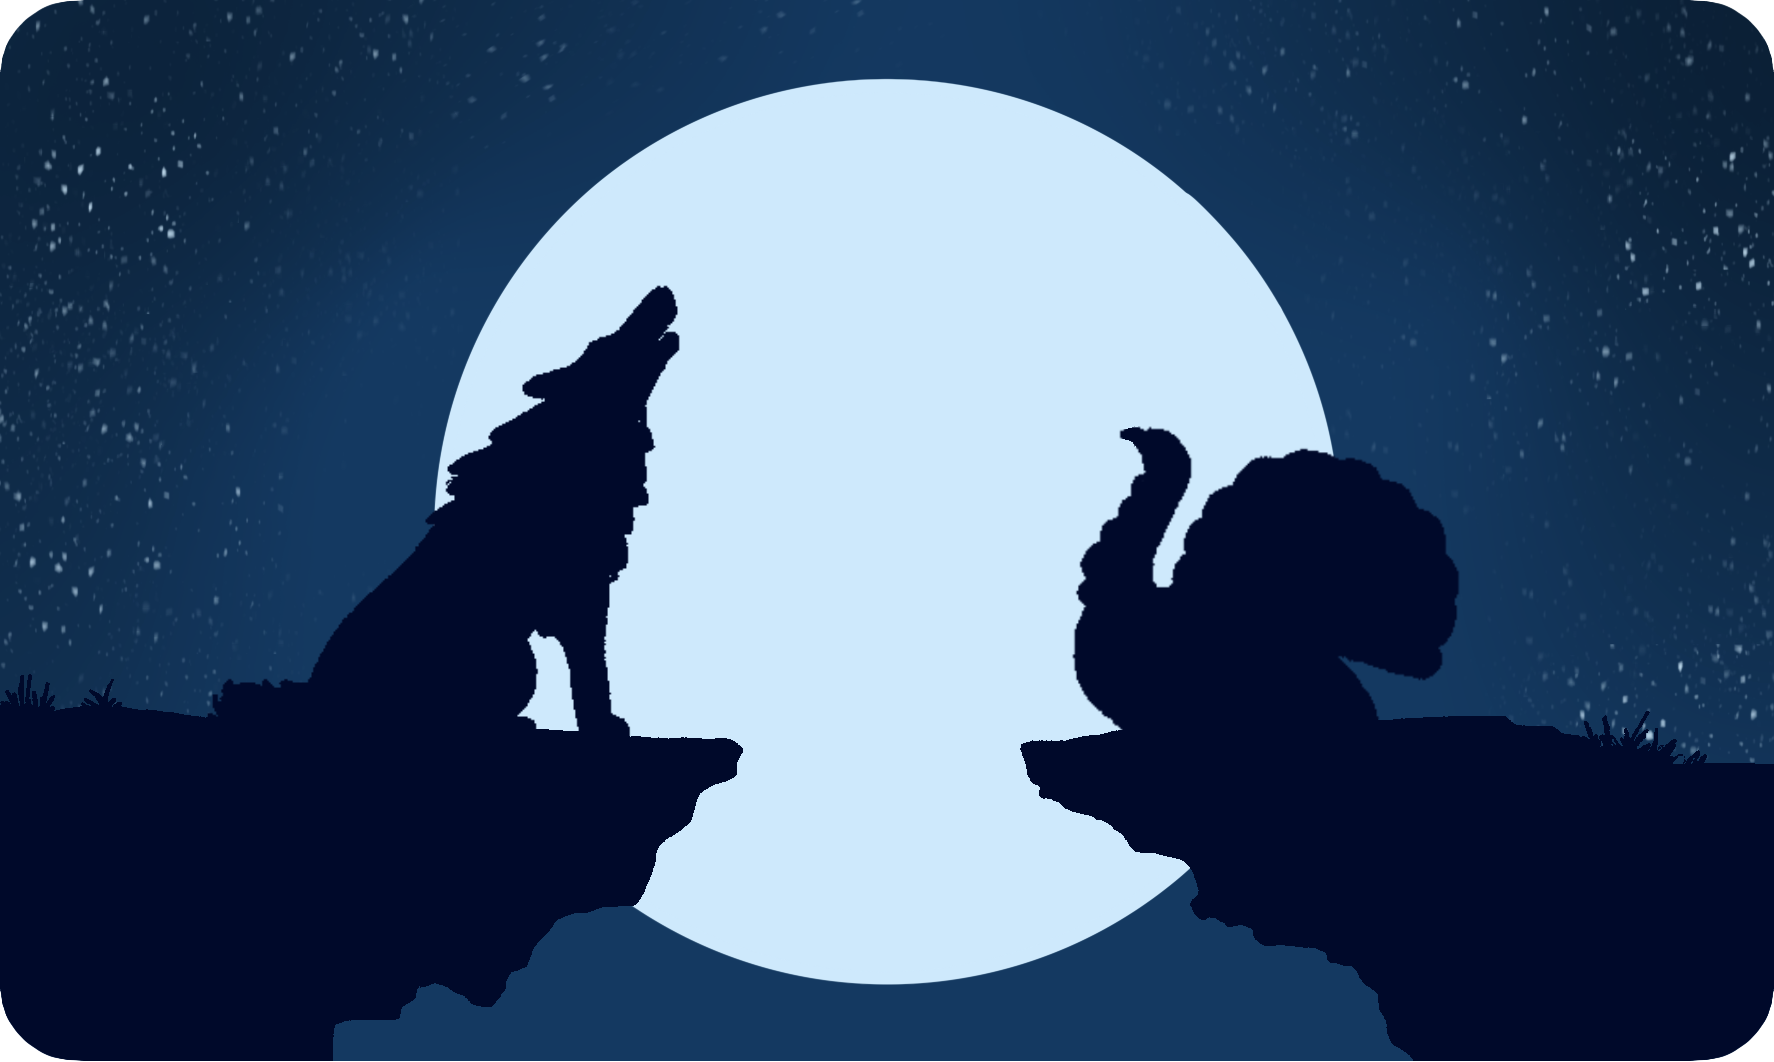 A howling wolf on the left, a howling turkey on the right, and a big full moon in the background.